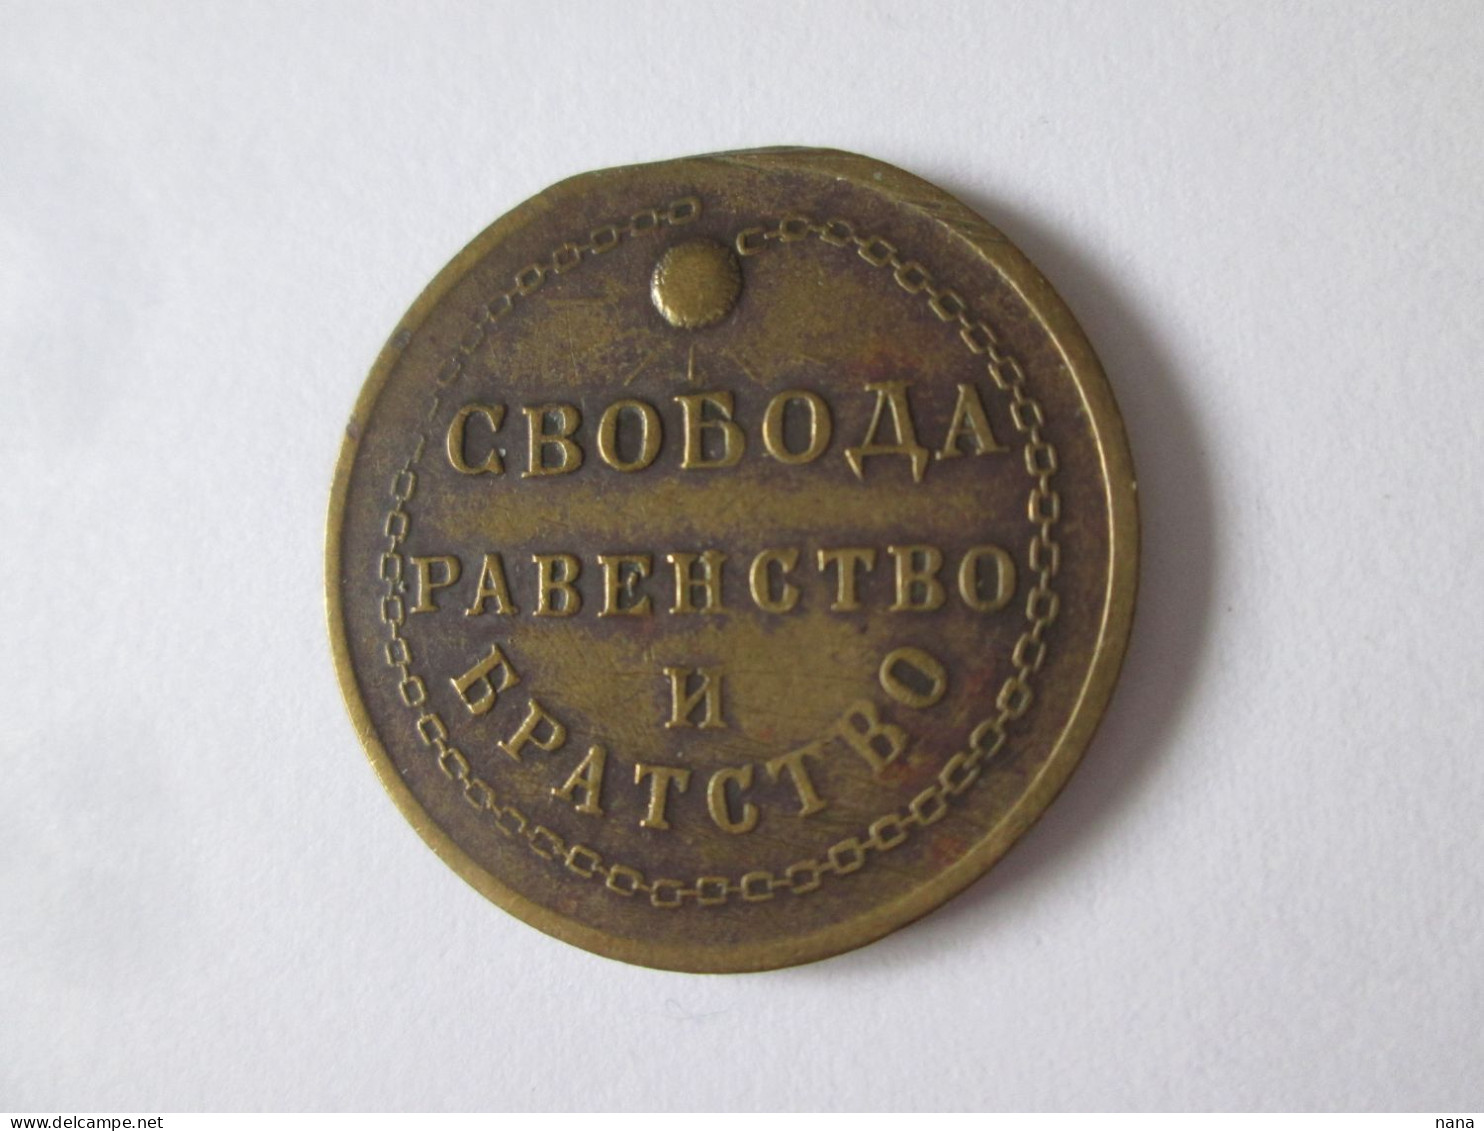 Rare! 1917 Russie Medaille Provis.du Gouvern.Kerensky/1917 Russia Provisional Kerensky Government Medal - Russland